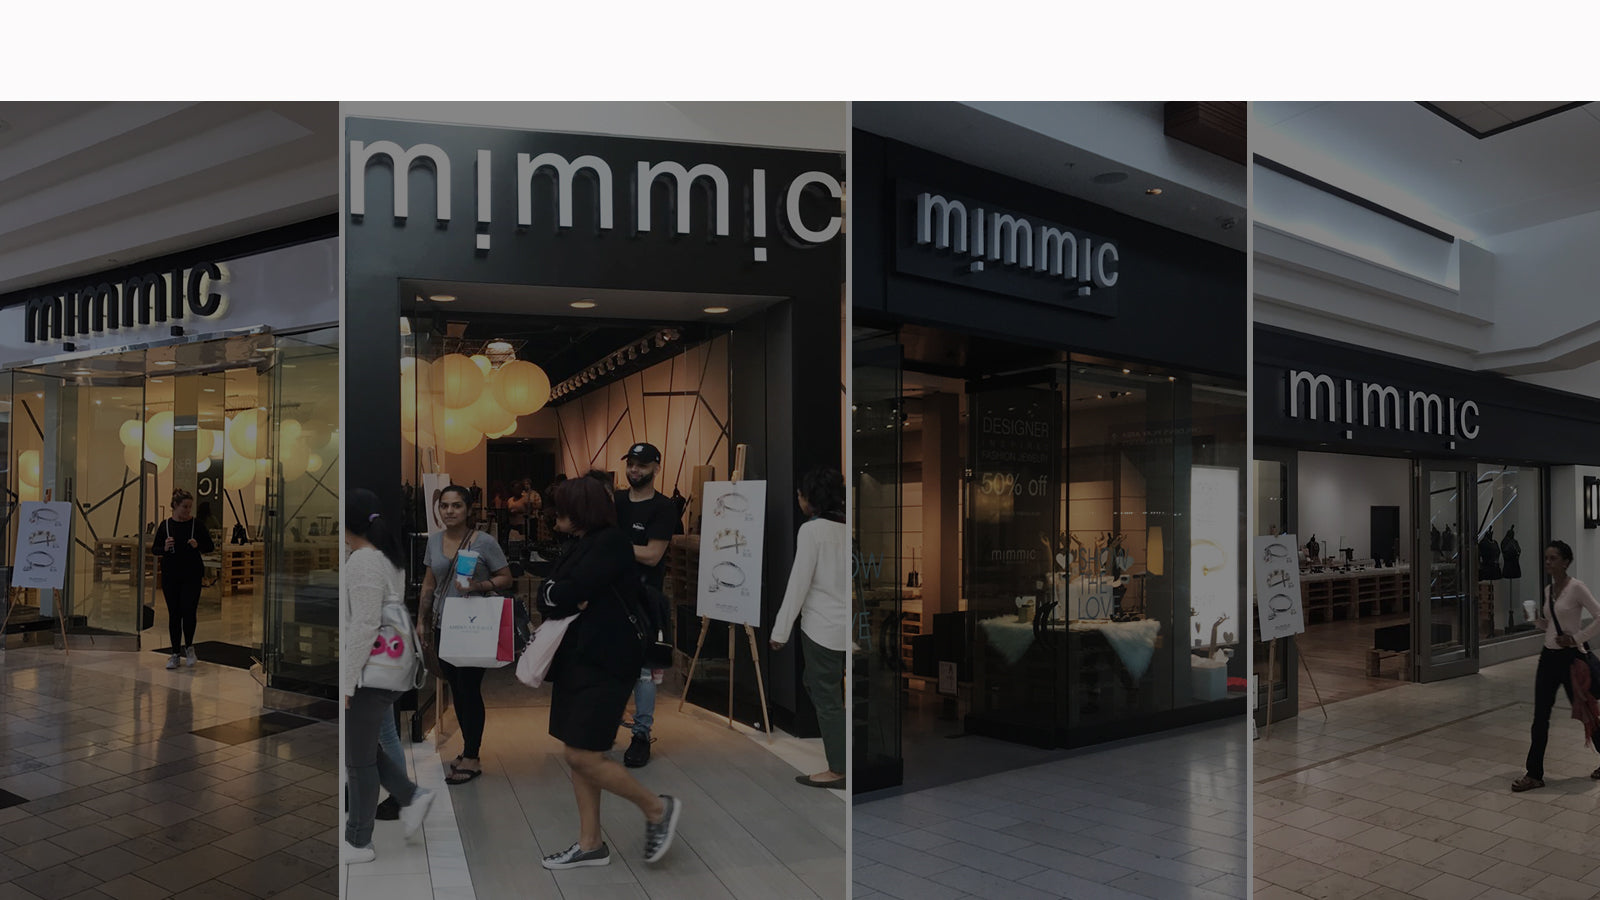 Compilation of four of the Mimmic Storefronts